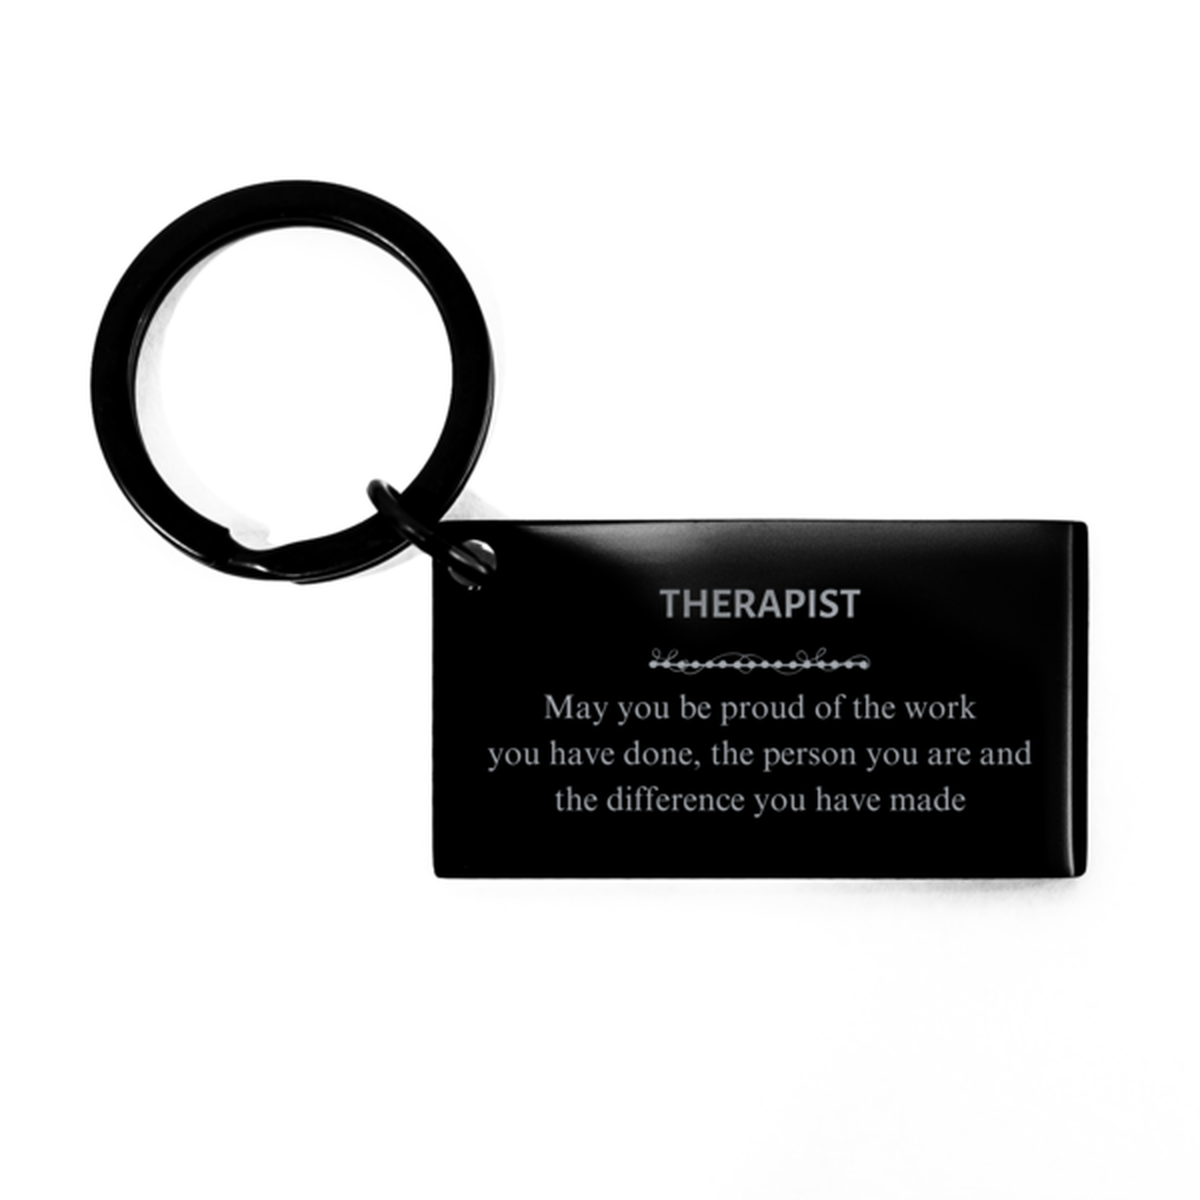 Youth Minister May you be proud of the work you have done, Retirement Therapist Keychain for Colleague Appreciation Gifts Amazing for Therapist